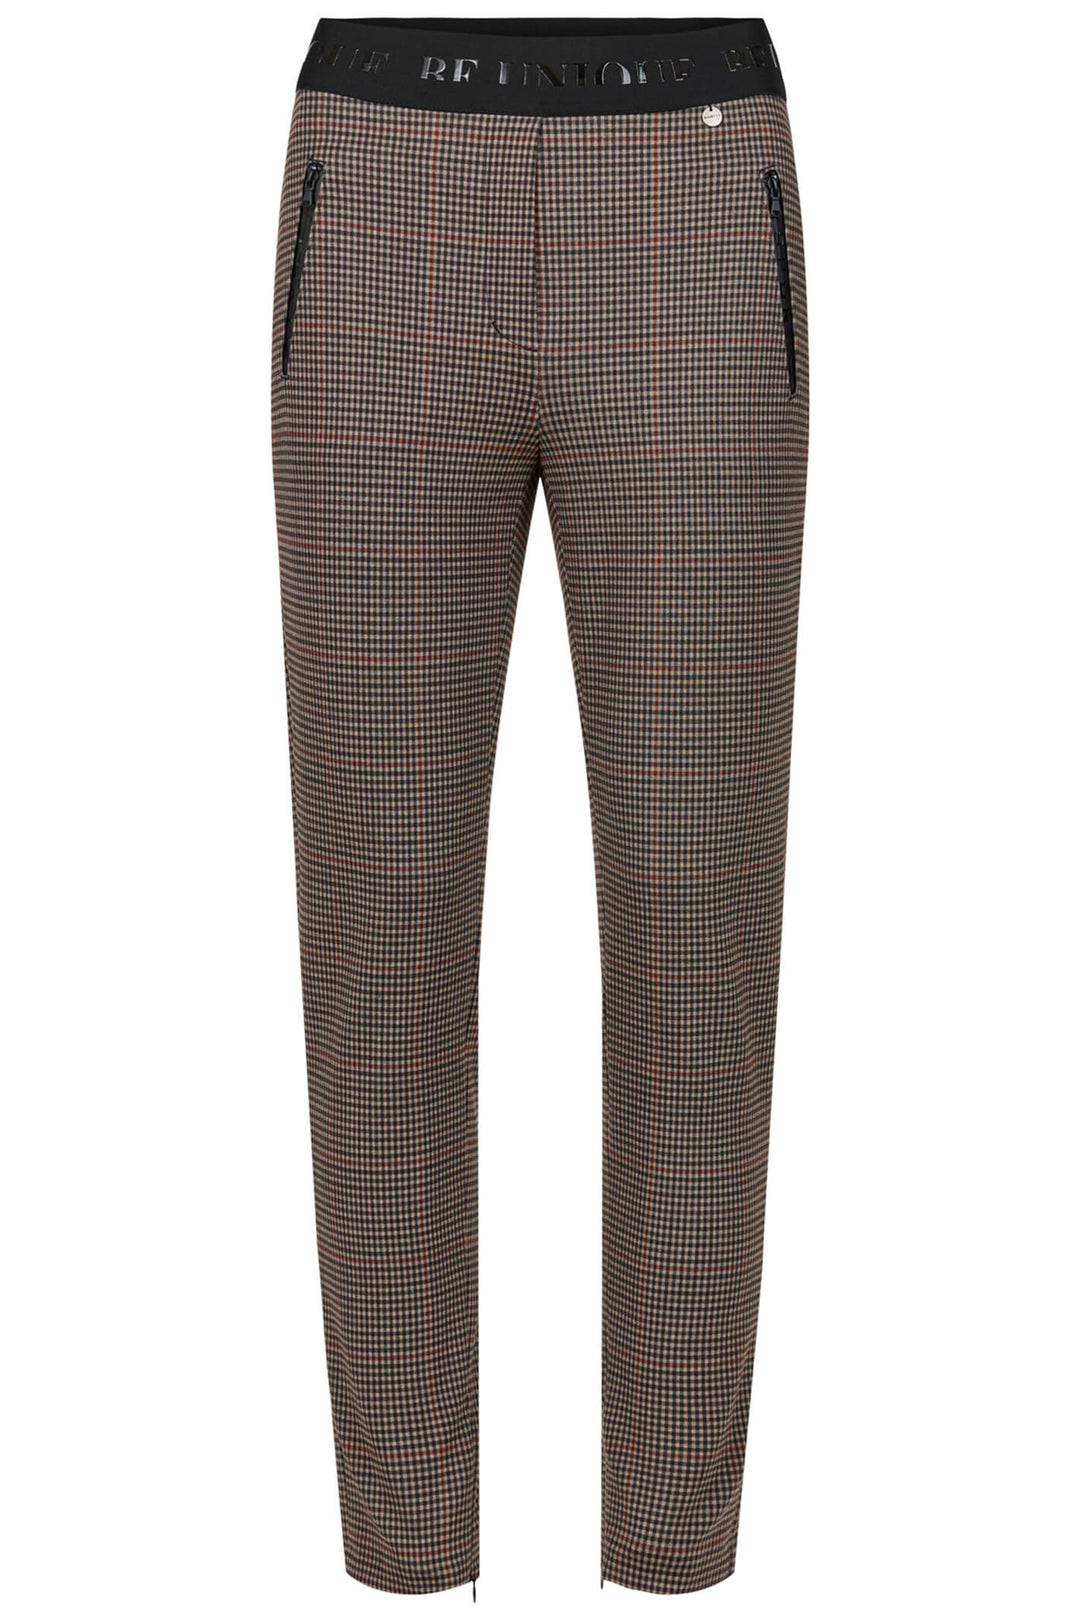 Robell 52629 38 Brown Check Nelly Trousers - Experience Boutique